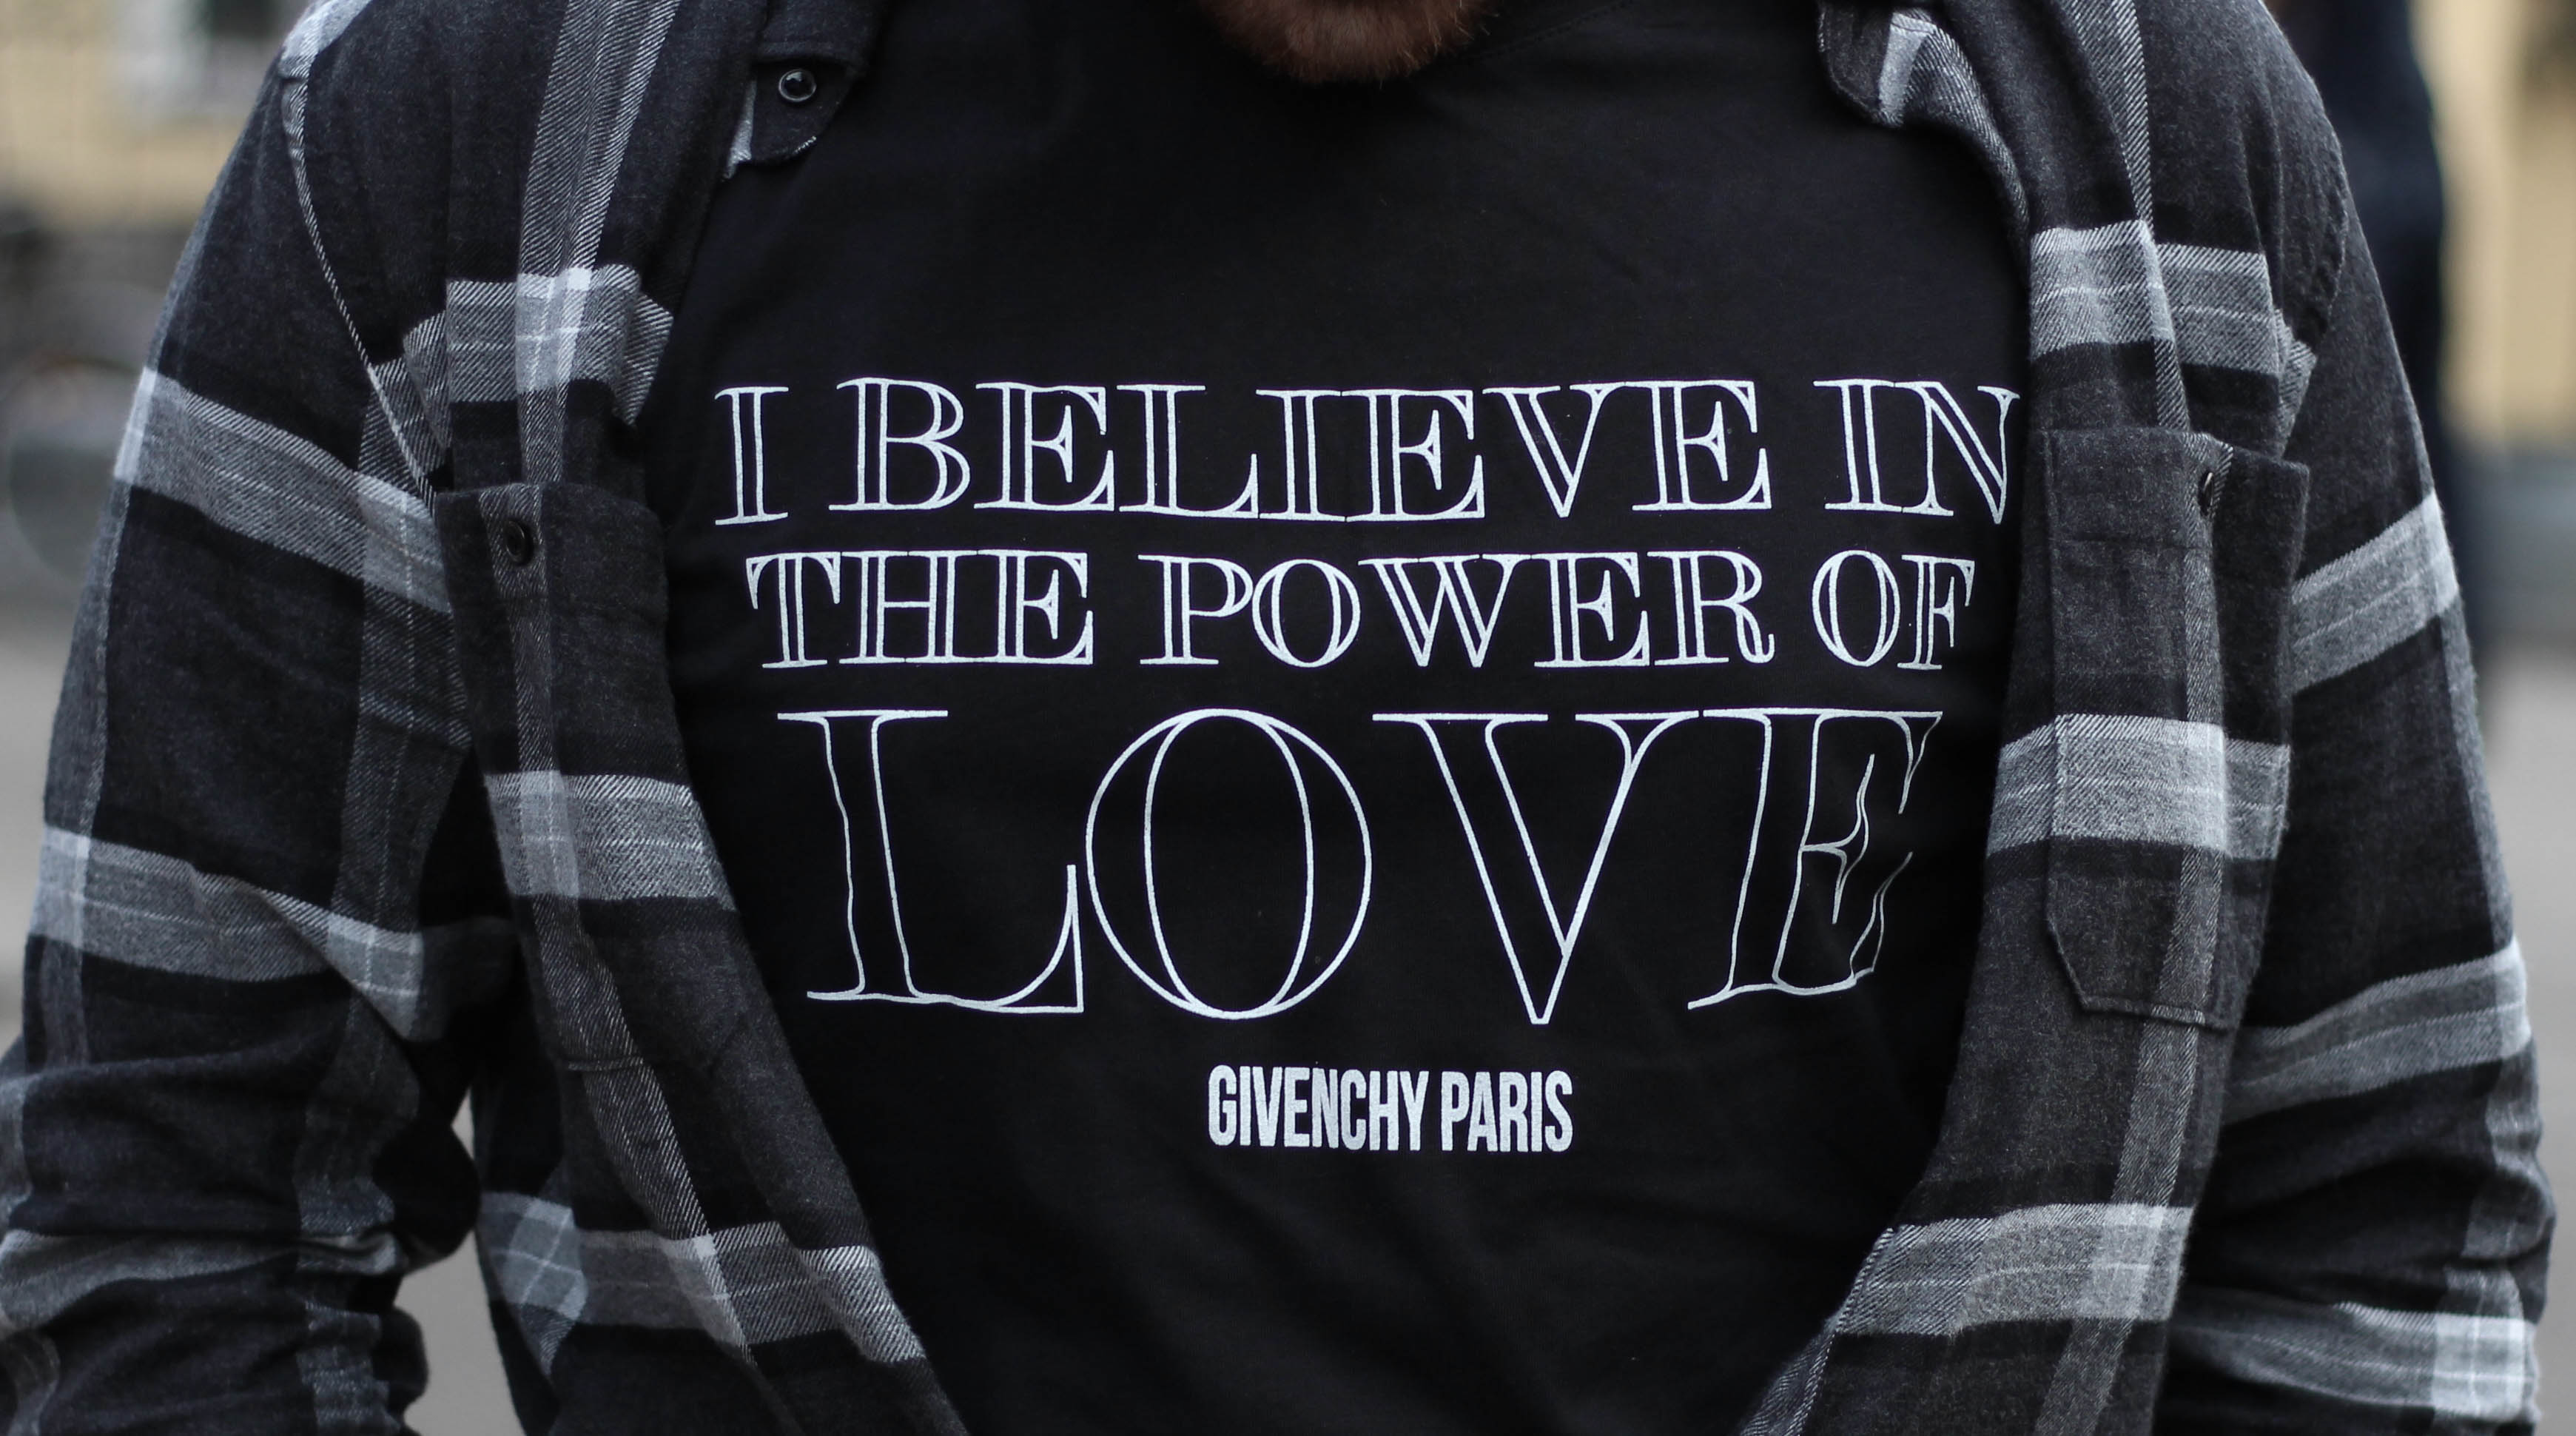 Givenchy i believe in the power of love — Keys of Andy